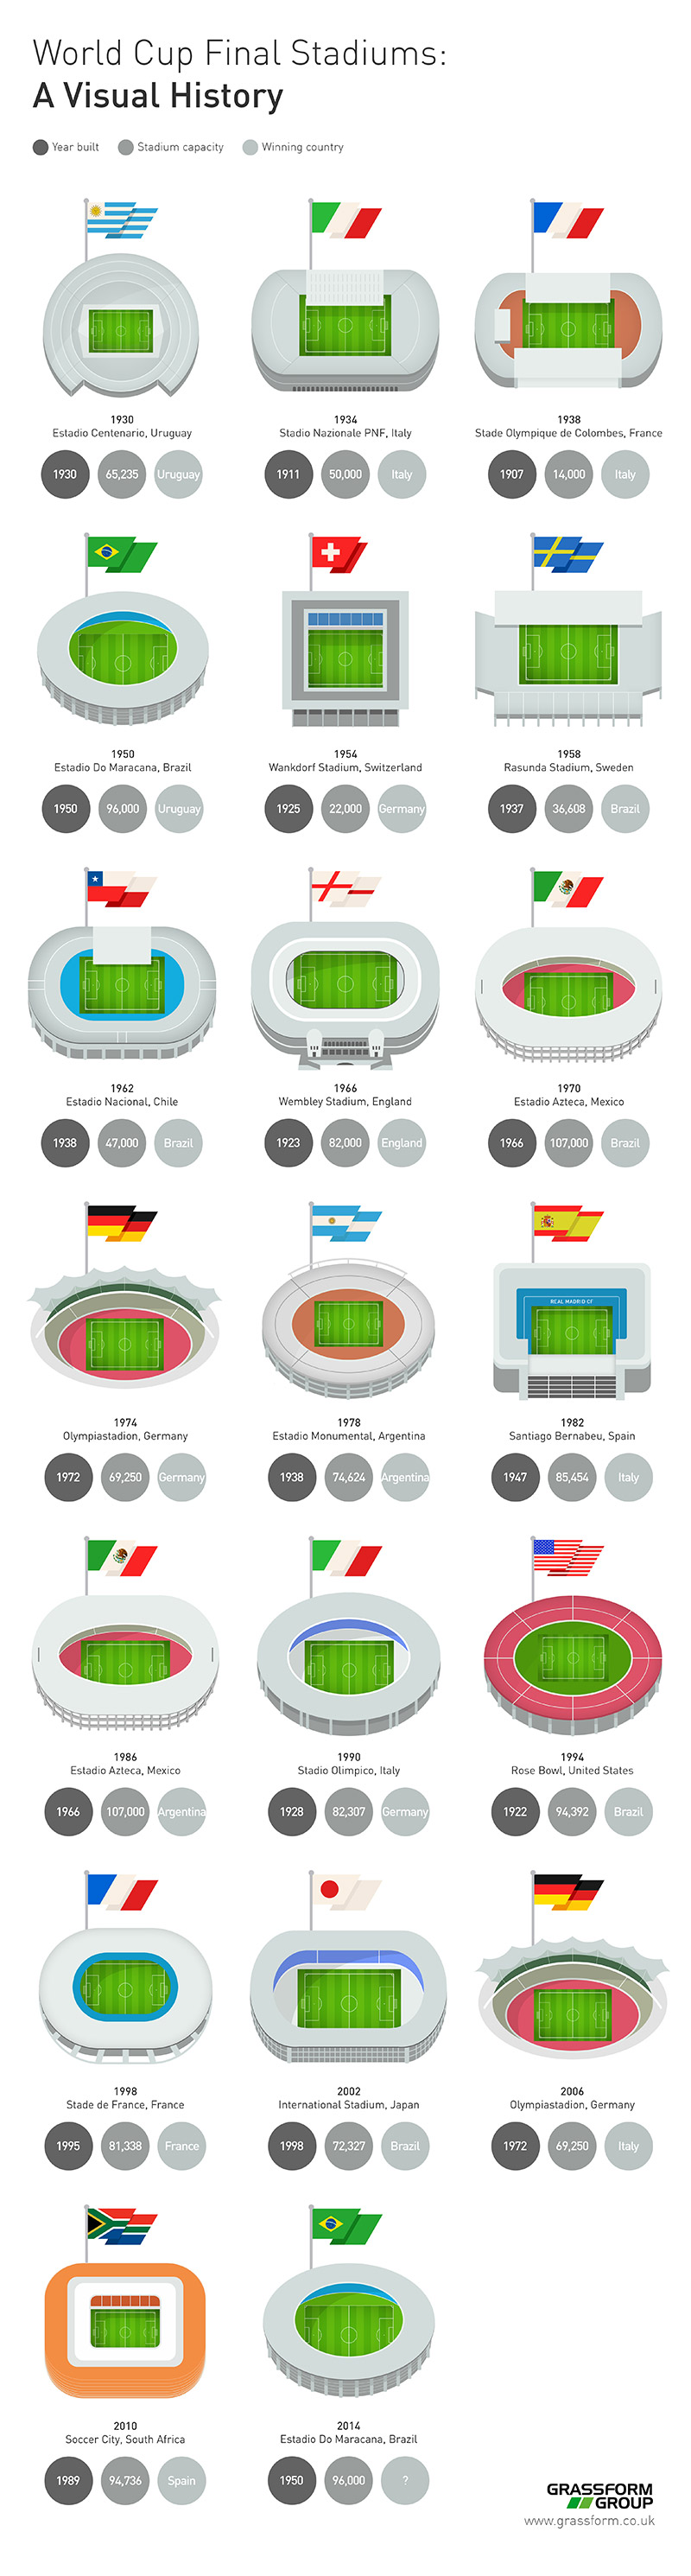 World Cup Final Stadiums by Grassform Group